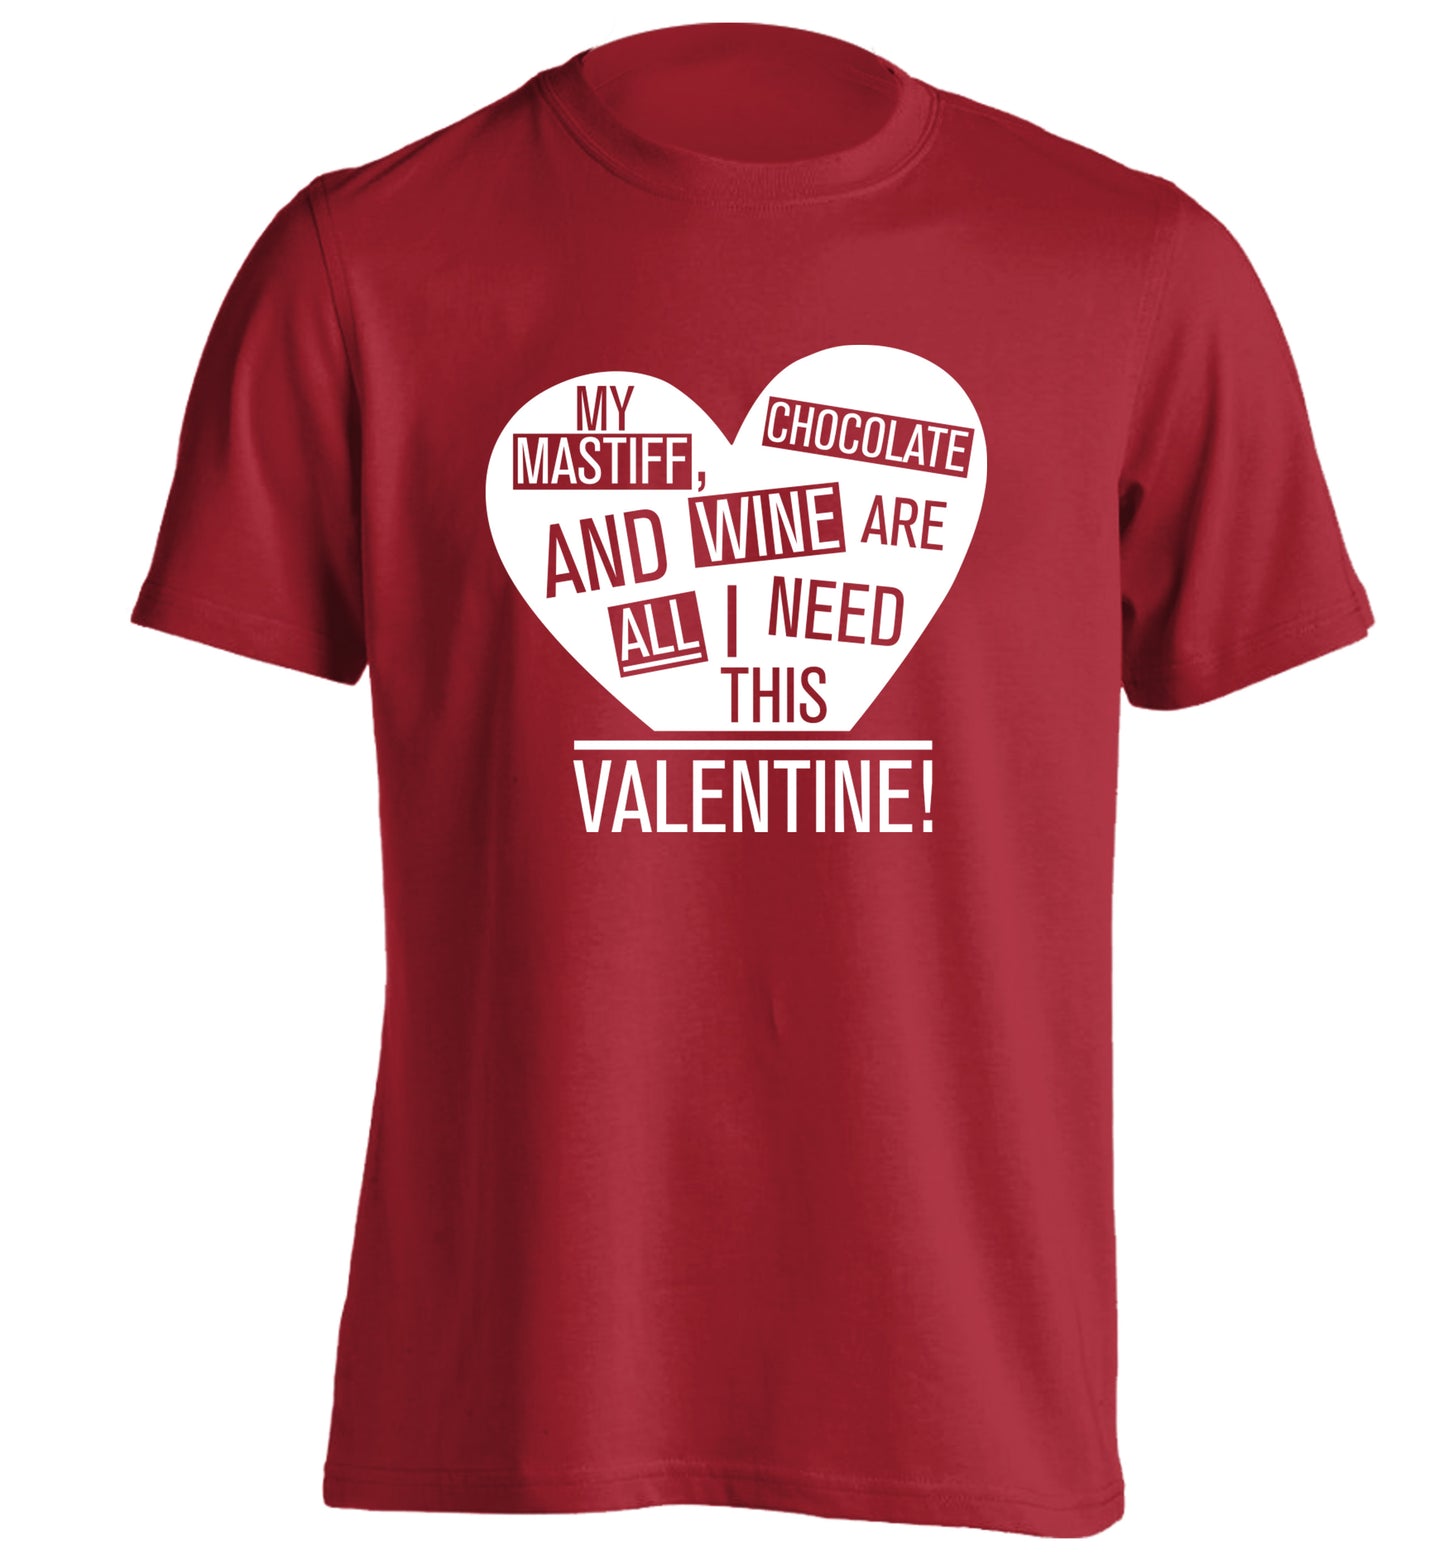 My mastiff, chocolate and wine are all I need this valentine! adults unisex red Tshirt 2XL